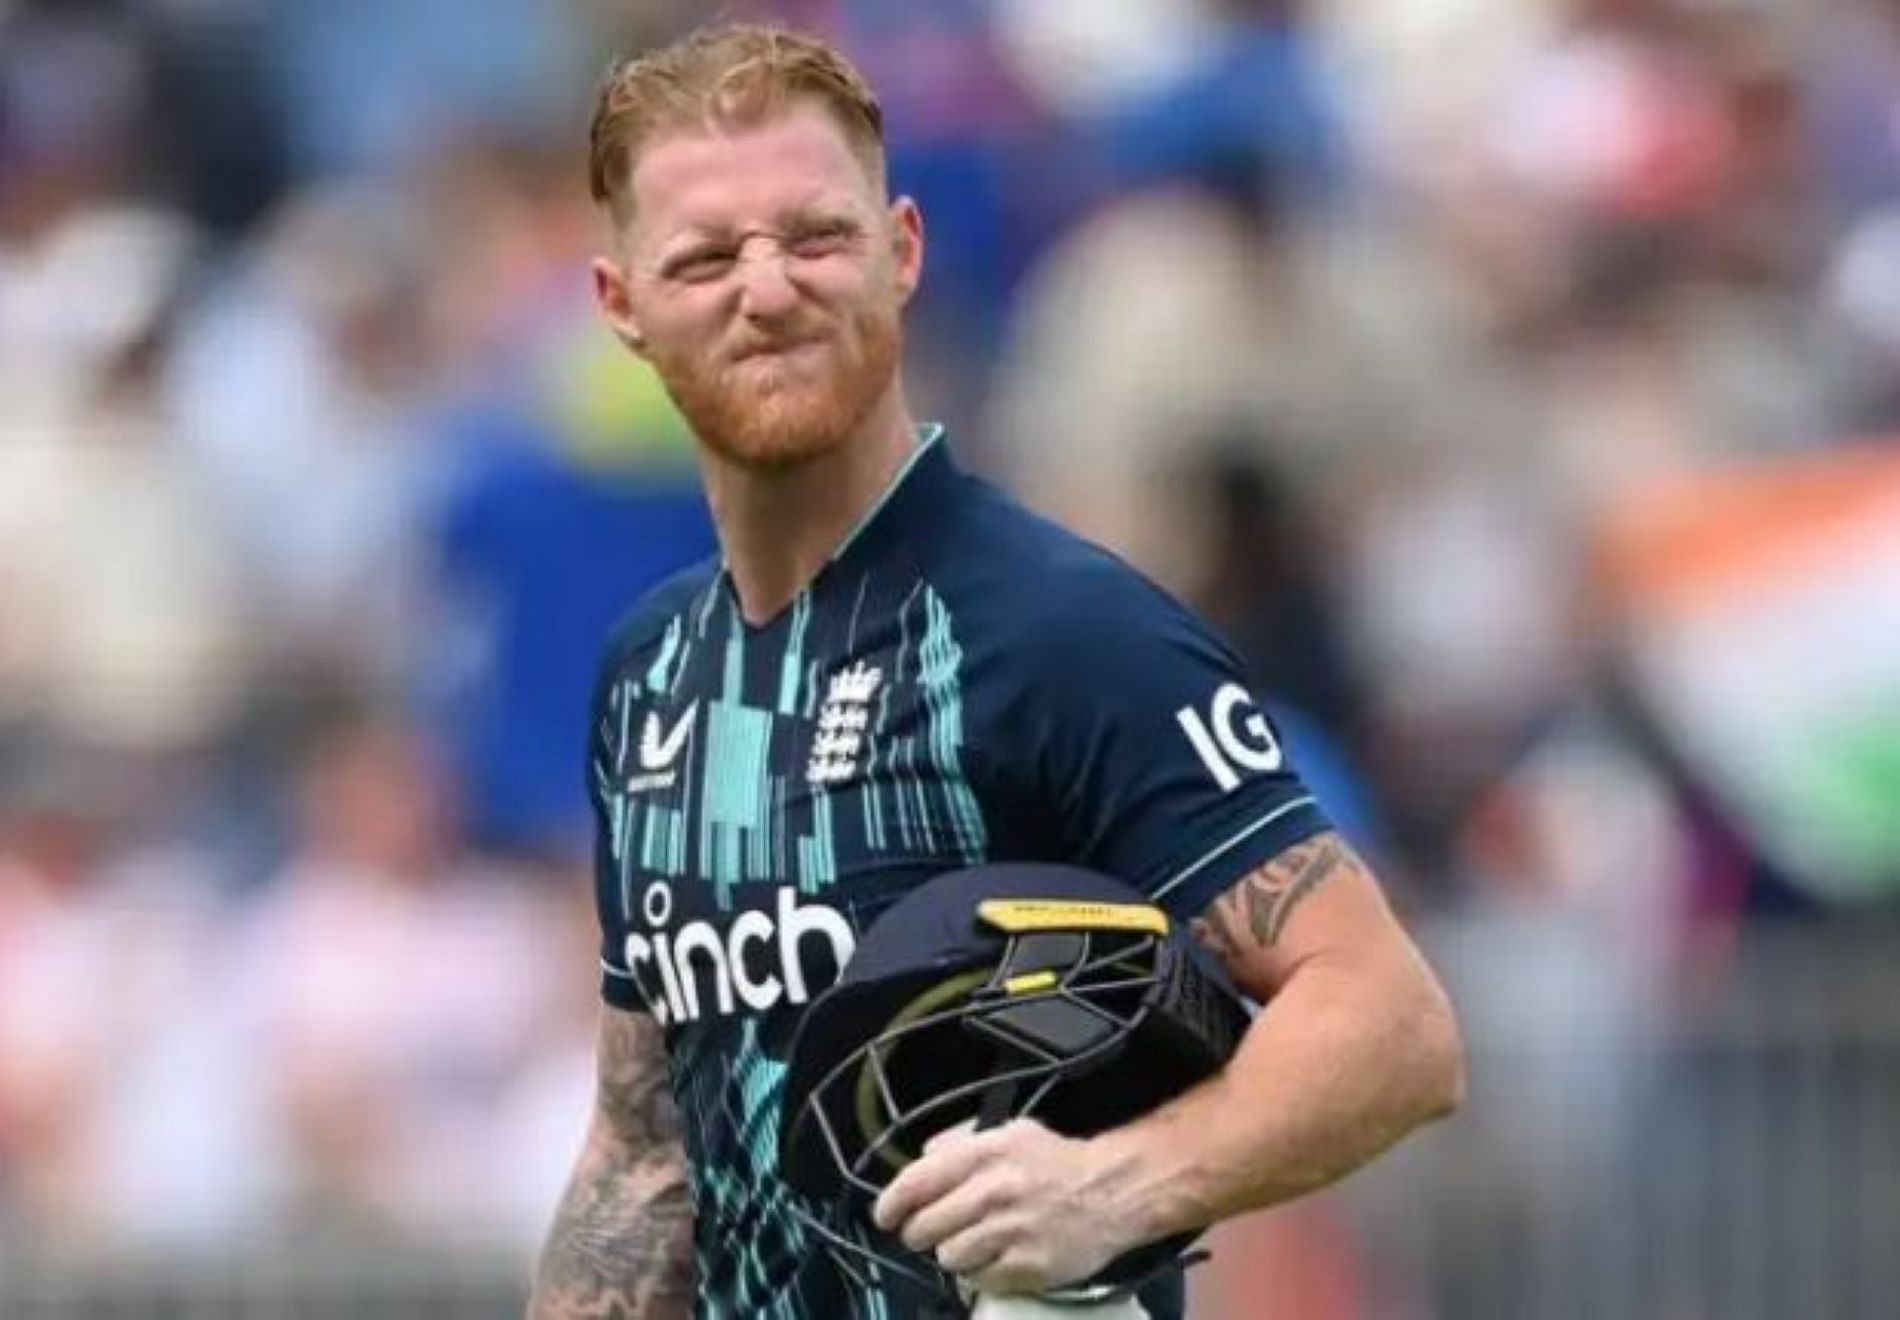 Stokes could play his final ODI of his career against Pakistan.